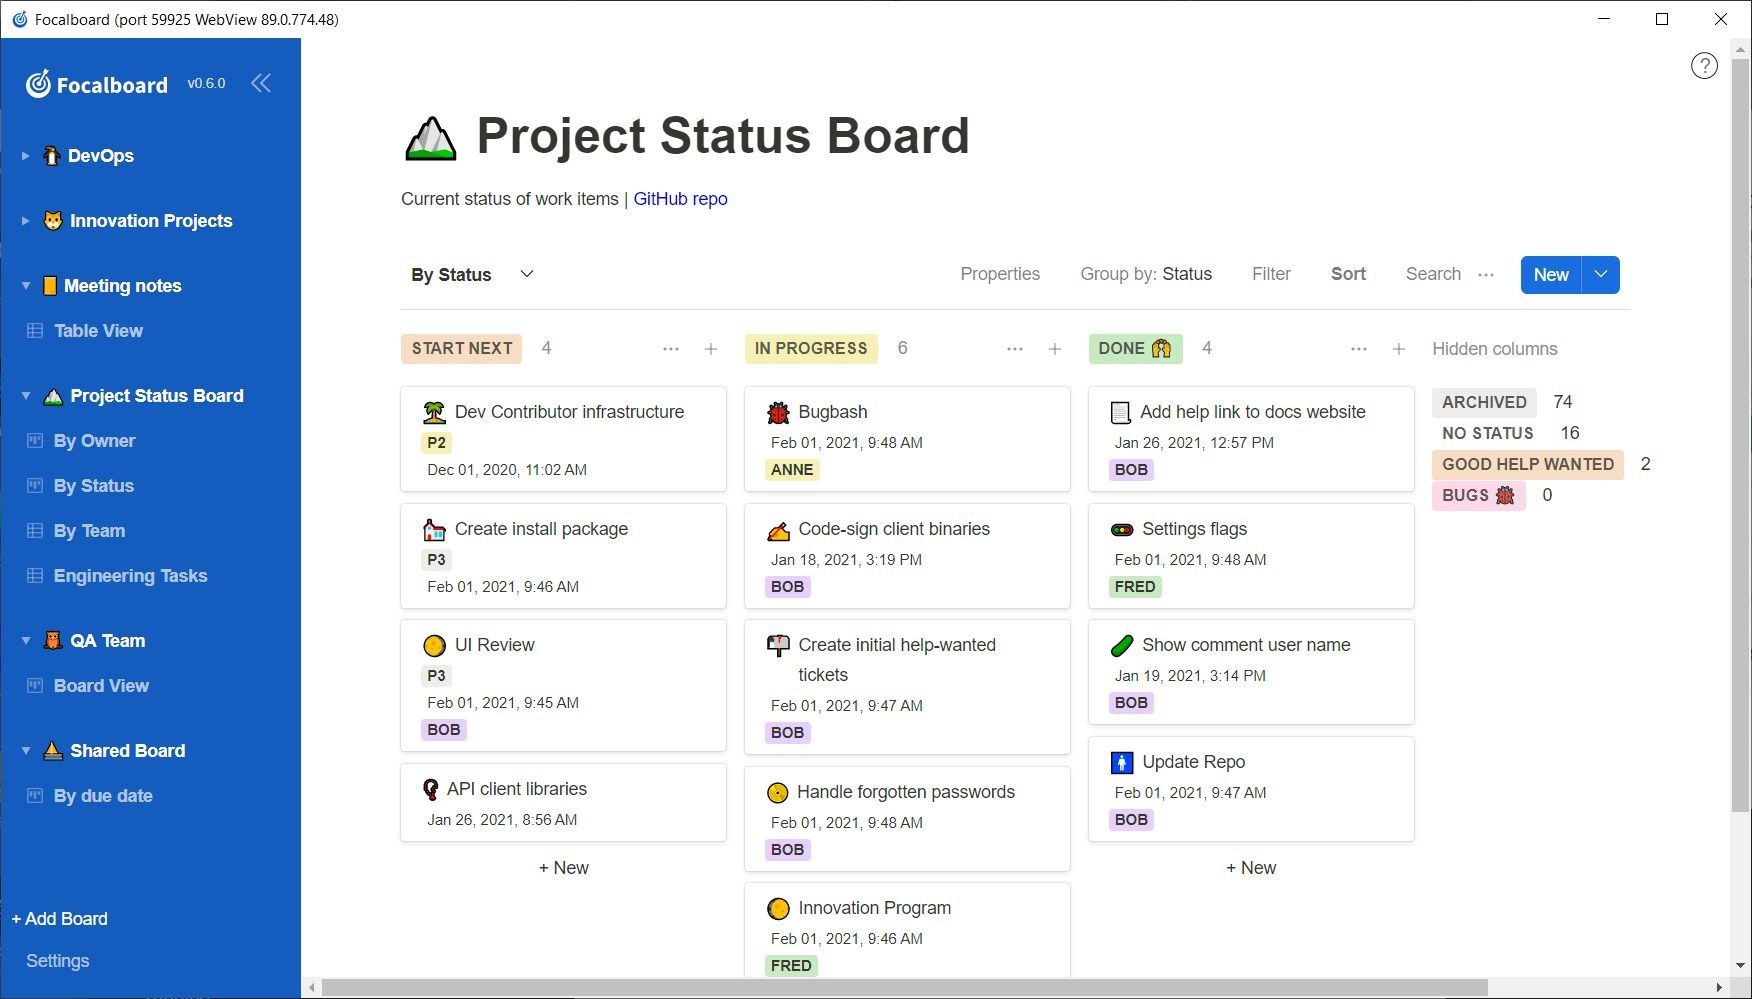 Track and manage your projects with ease